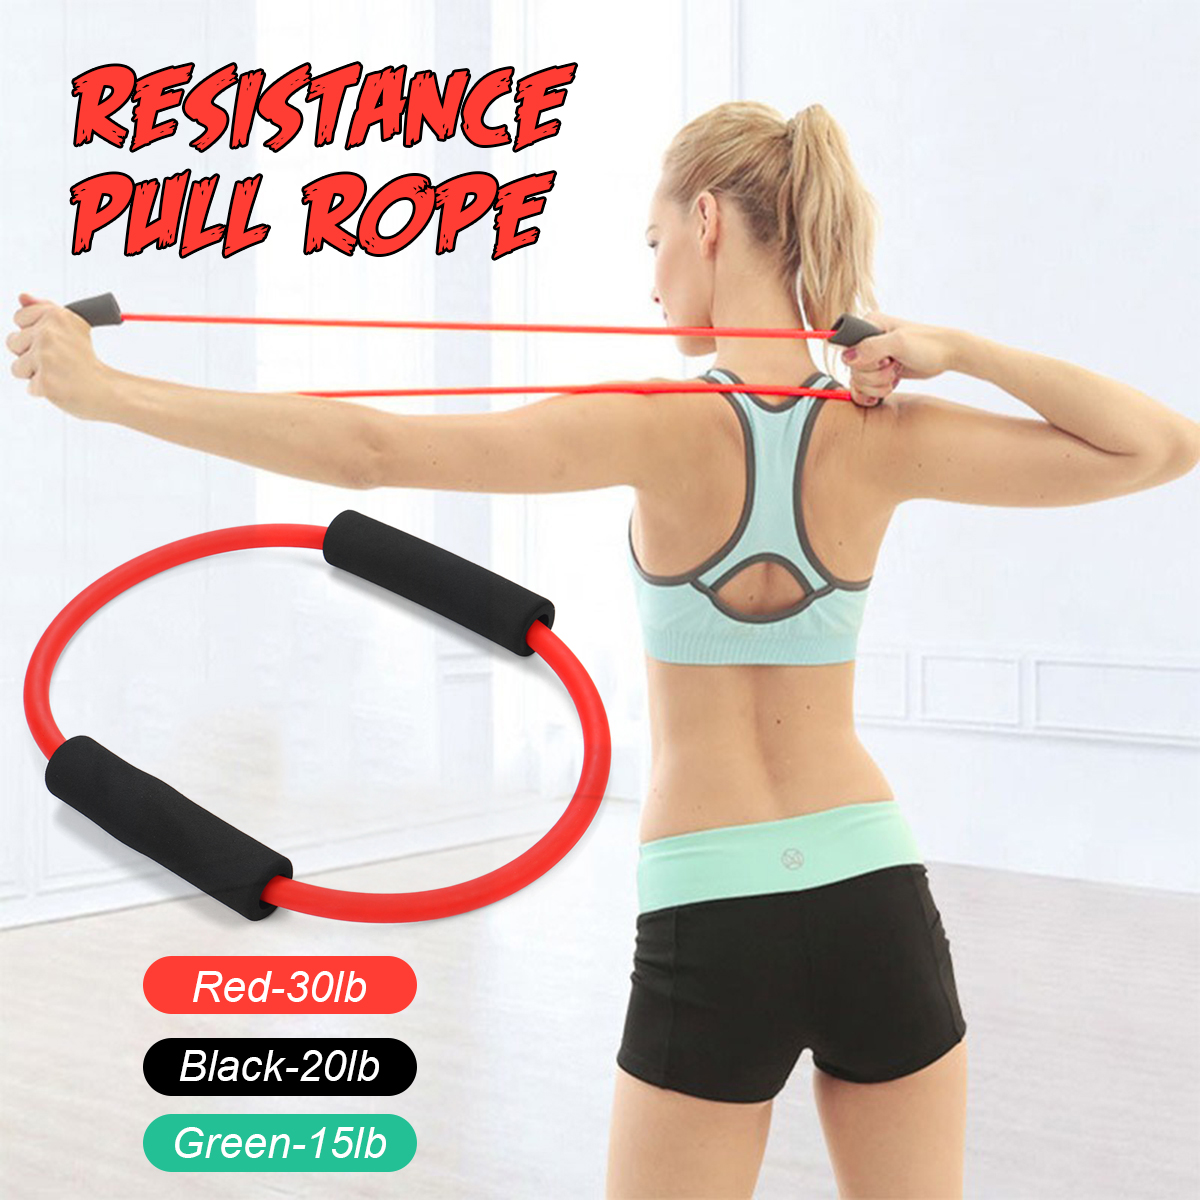 152030lb-Fitness-Resistance-Bands-Gym-Yoga-Pull-Rope-Gym-Exercise-Training-Workout-Tools-1684050-1